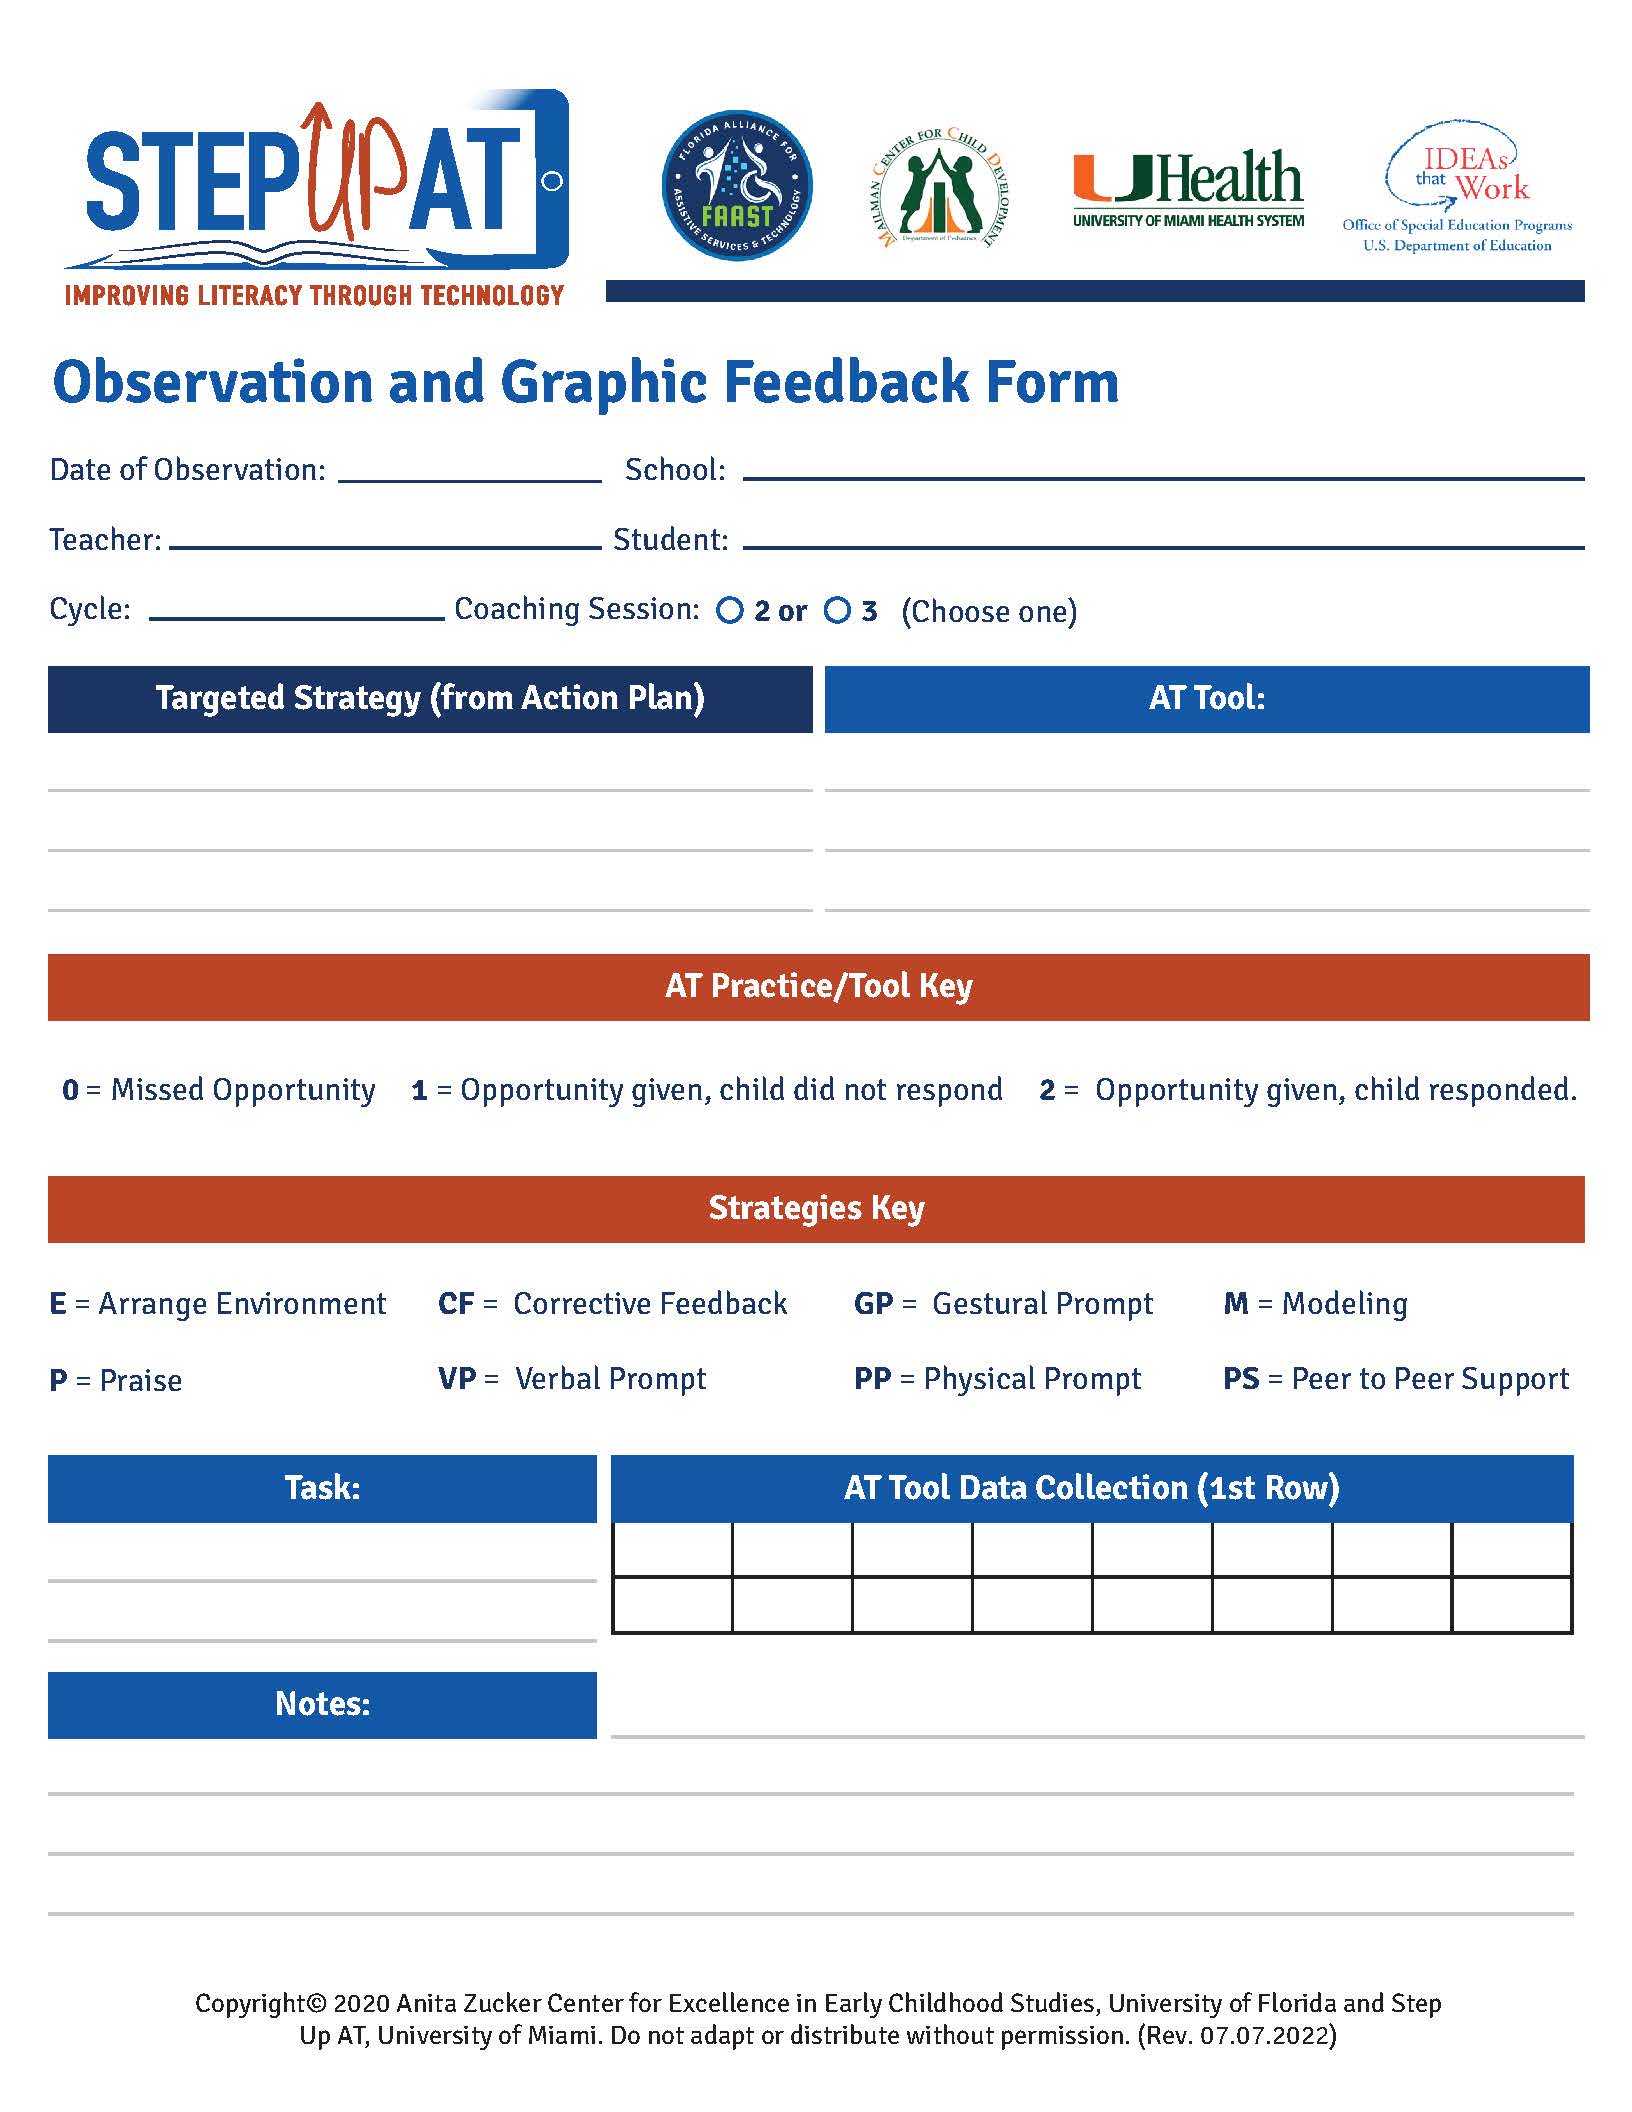 Step Up AT Observation and Graphic Feedback Form